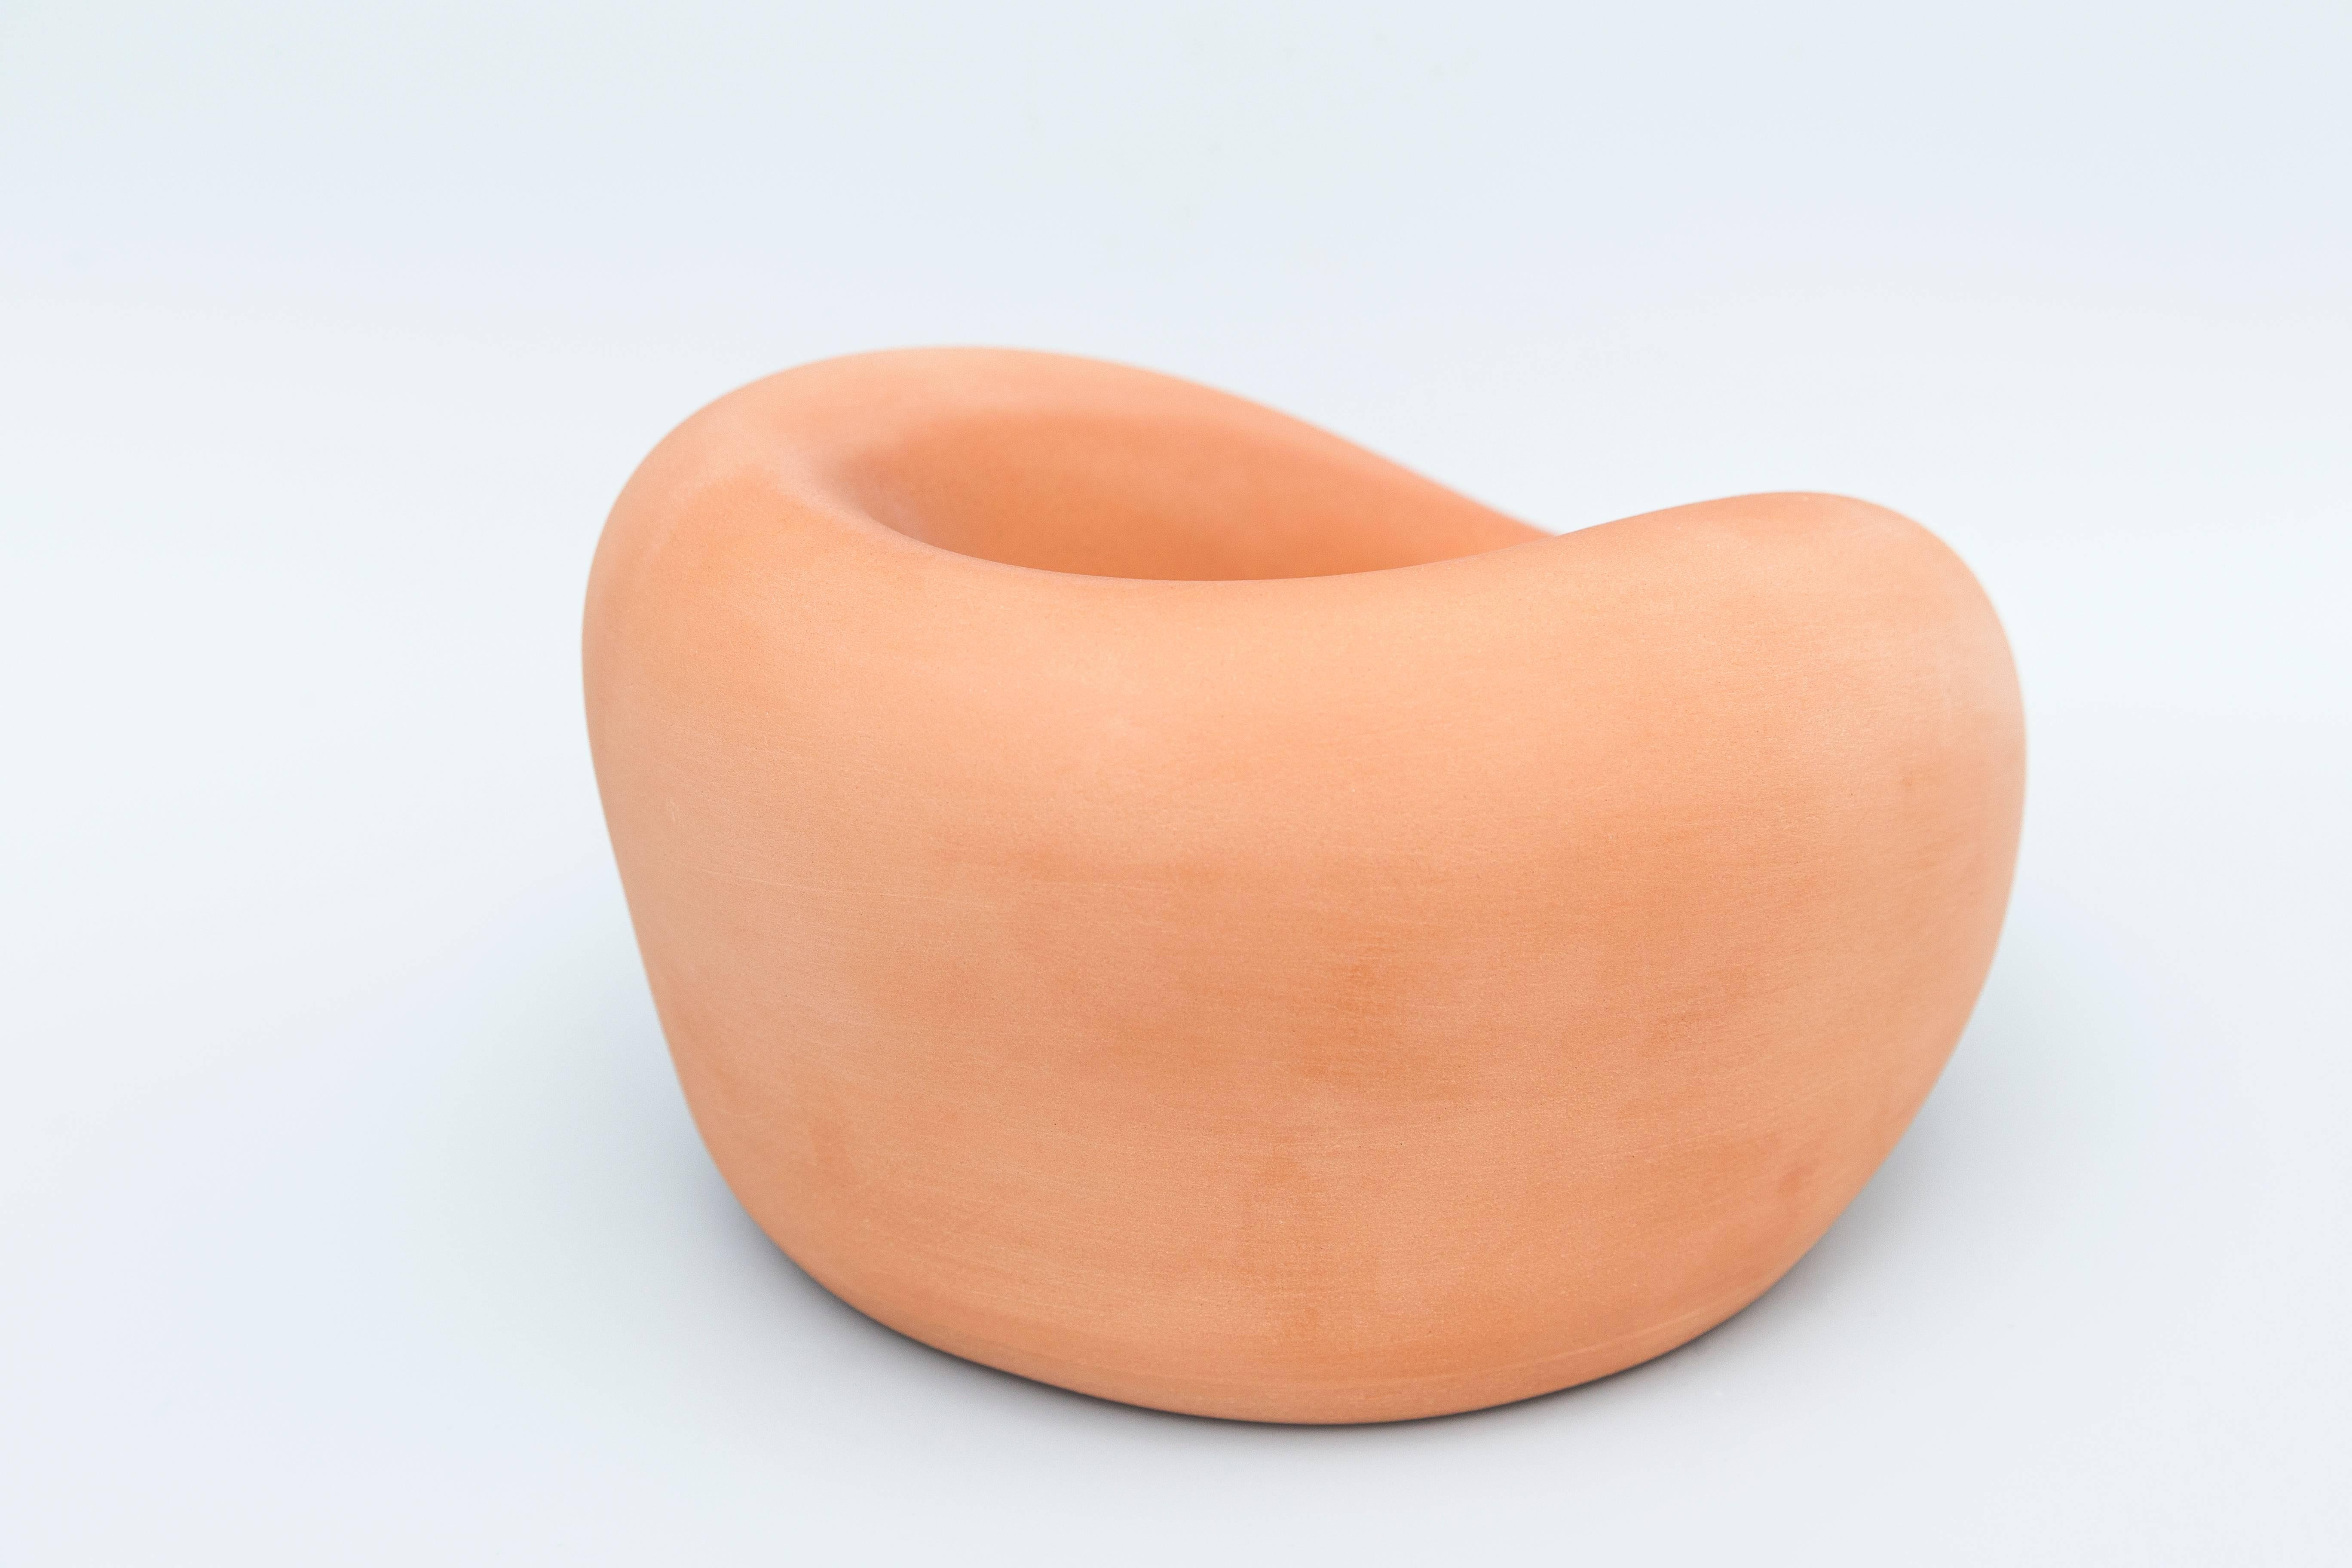 Touch bowls are ceramic bowls in various sizes made with imprints of the human body. Touch bowls is a continuous research through sculptural objects investigating what kind of shapes and suggestive functions human body can provide. It's about forms